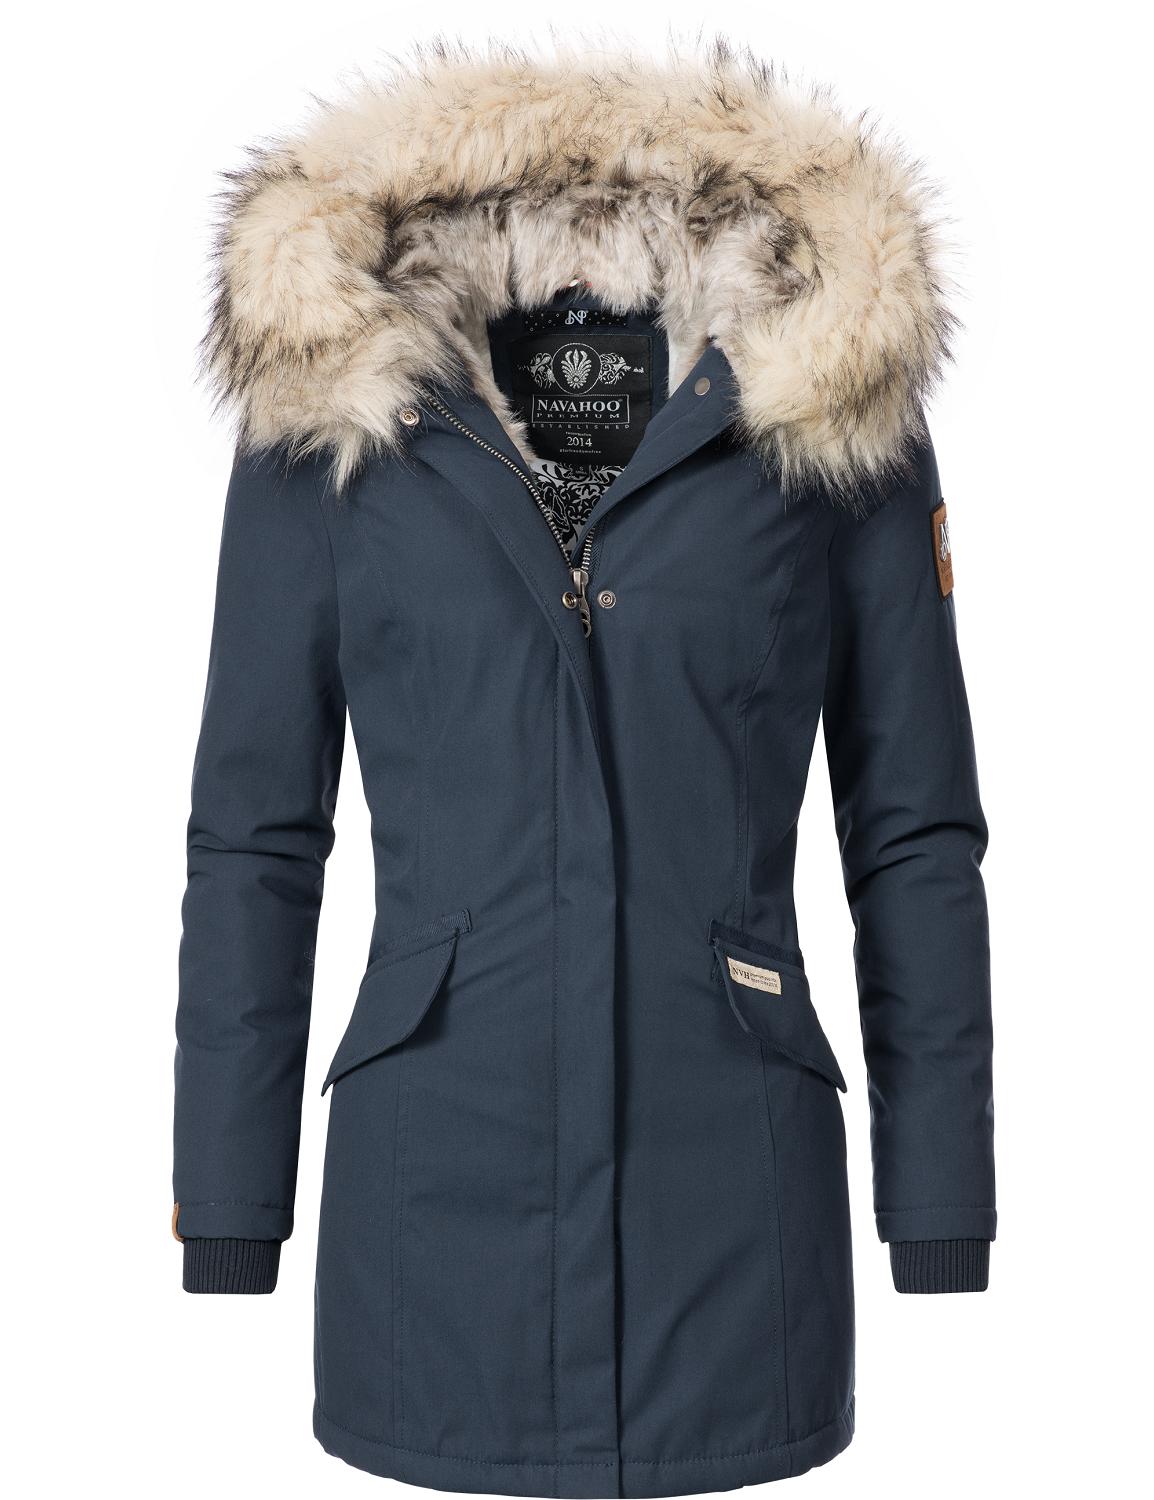 Giacche jMyws NAVAHOO Parka invernale Cristal in Blu Scuro 